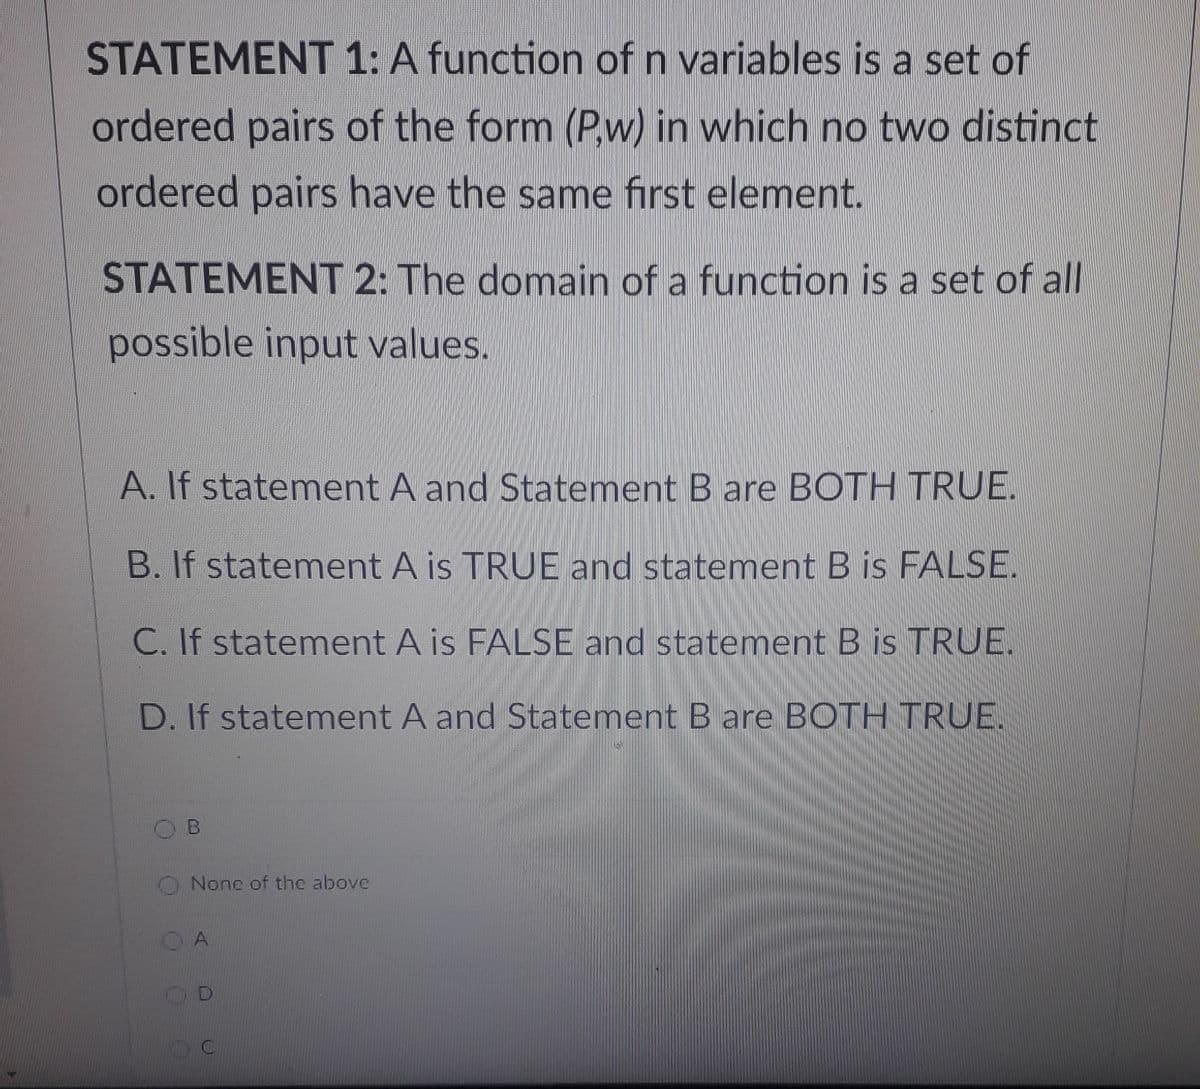 STATEMENT 1: A function of n variables is a set of
ordered pairs of the form (P,w) in which no two distinct
ordered pairs have the same first element.
STATEMENT 2: The domain of a function is a set of all
possible input values.
A. If statement A and Statement B are BOTH TRUE.
B. If statement A is TRUE and statement B is FALSE.
C. If statement A is FALSE and statement B is TRUE.
D. If statement A and Statement B are BOTH TRUE.
O Nonc of the above
